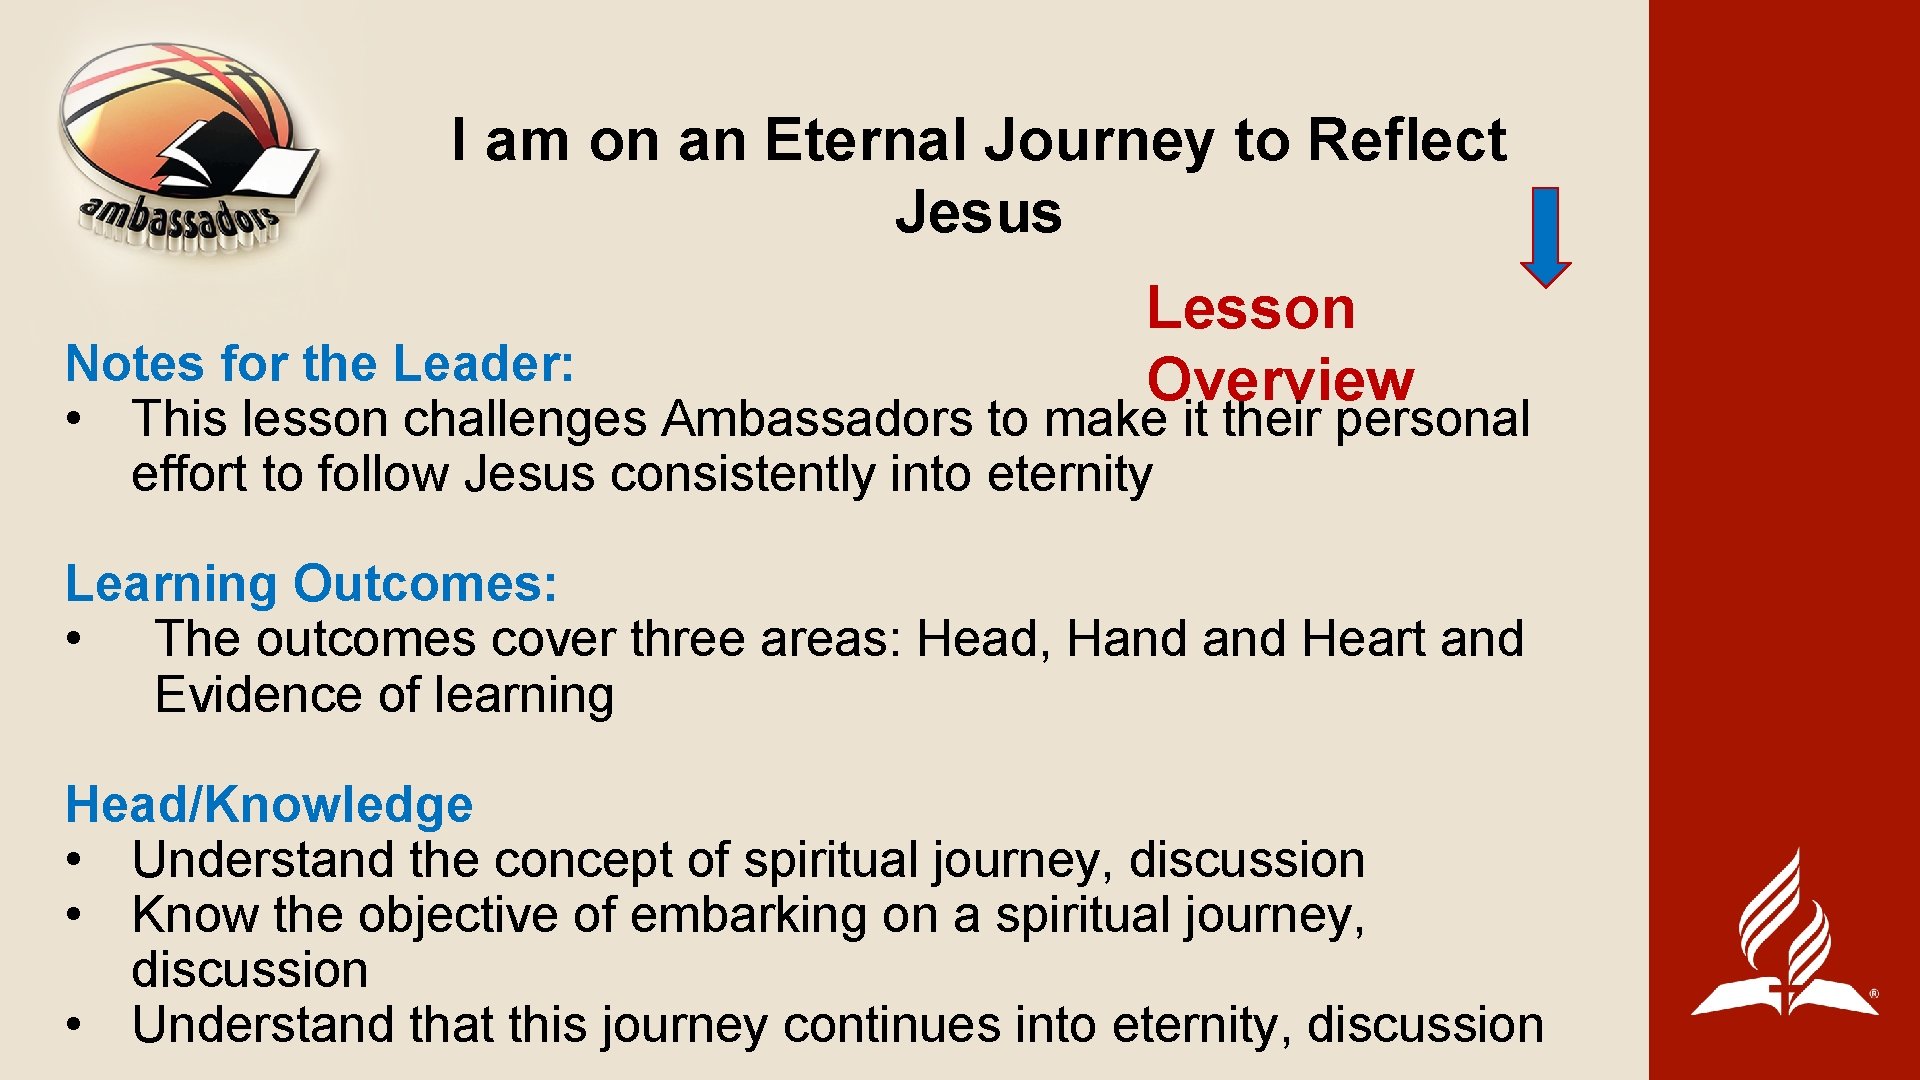 I am on an Eternal Journey to Reflect Jesus Lesson Overview Notes for the